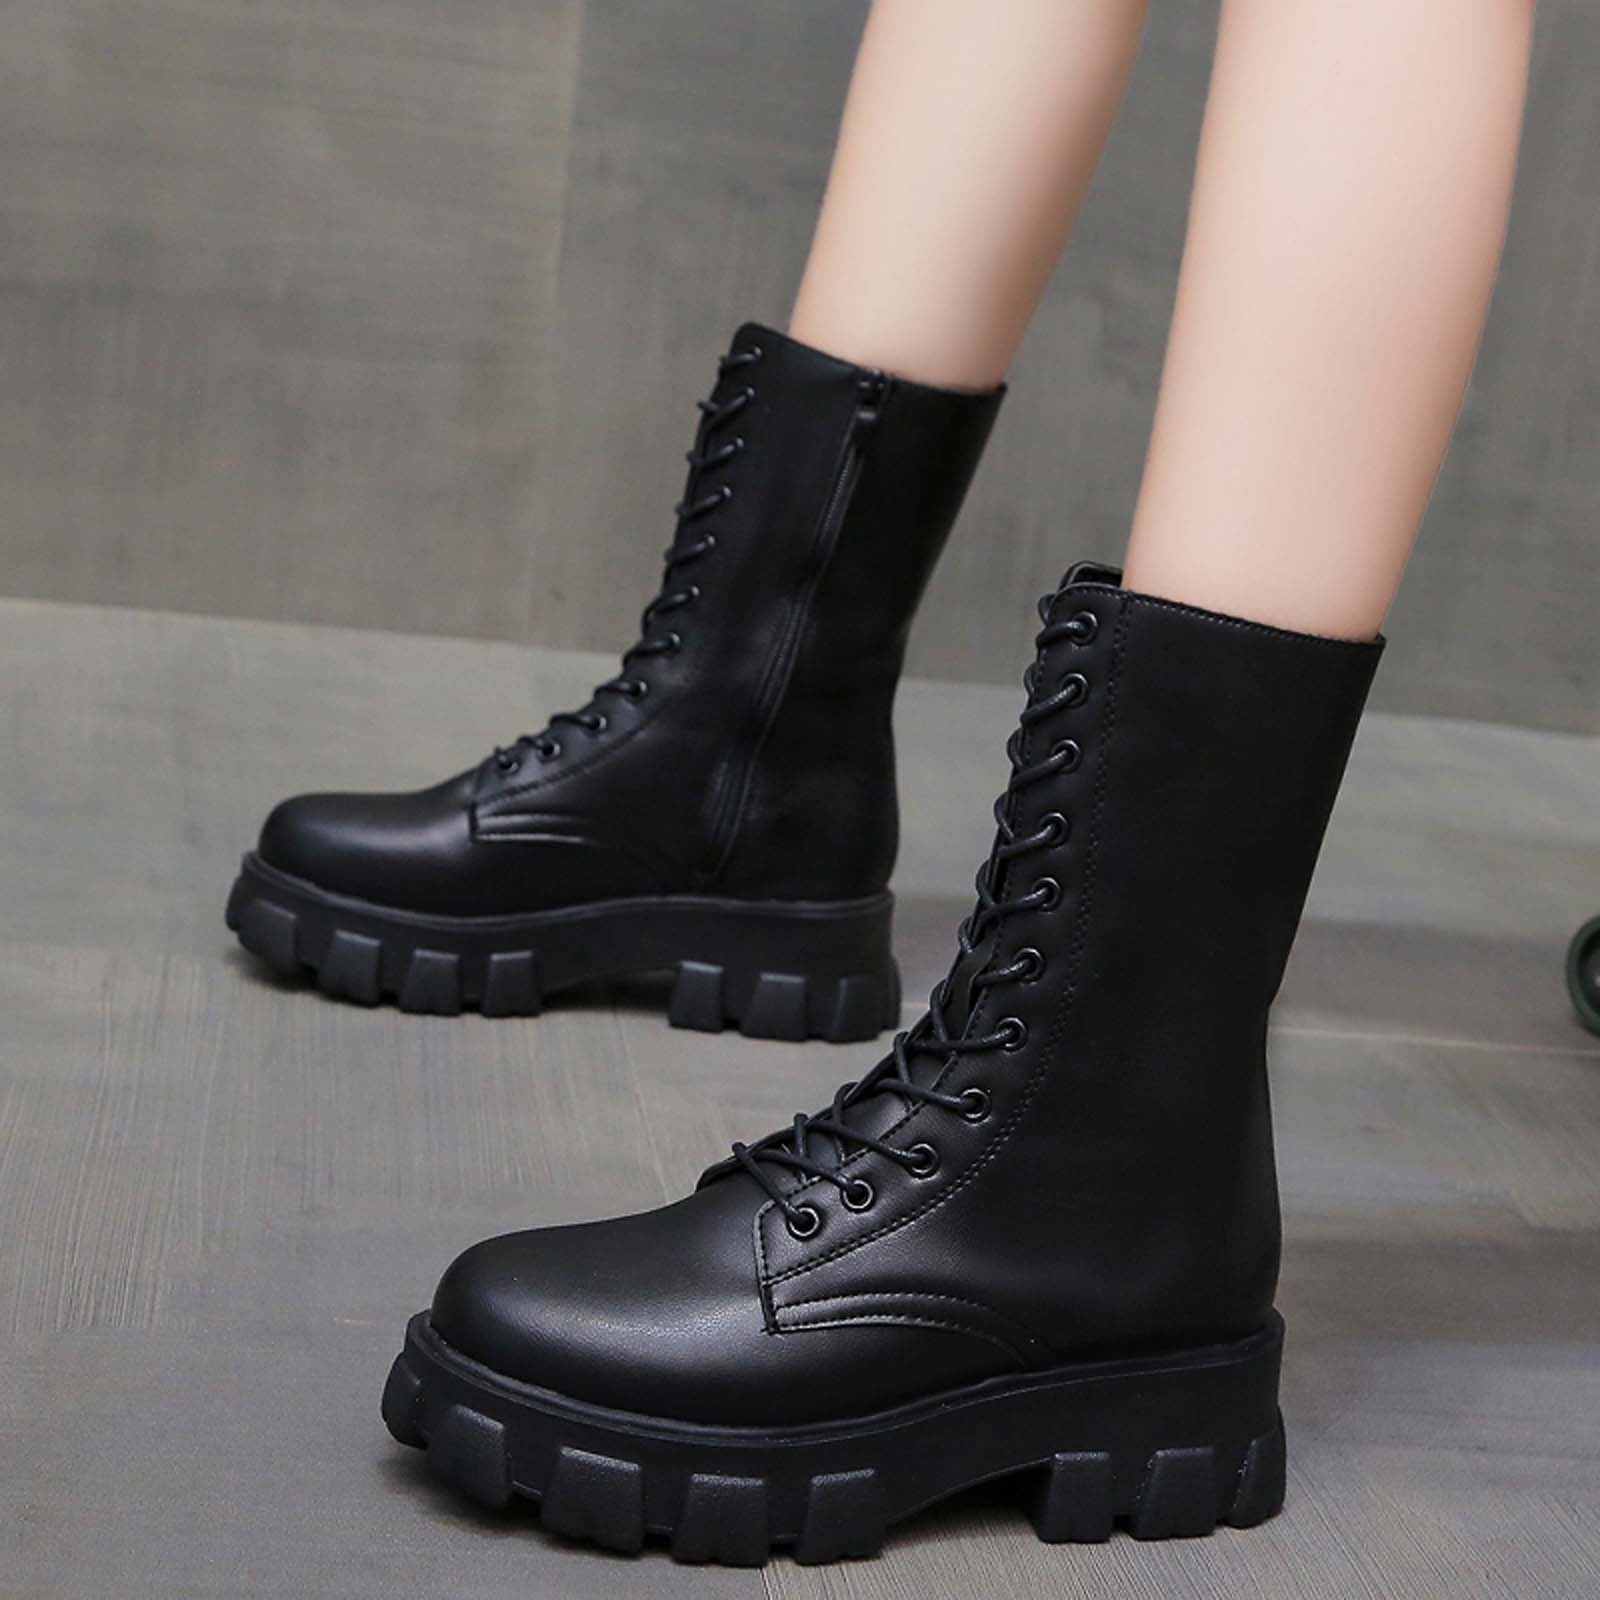 Juebong Boots on Sale Women's Toe Platform Boots Chunky Heel Lace-Up Motorcycle Boots Chelsea Boots Lug Non-Slip Comfy Shoes - Walmart.com